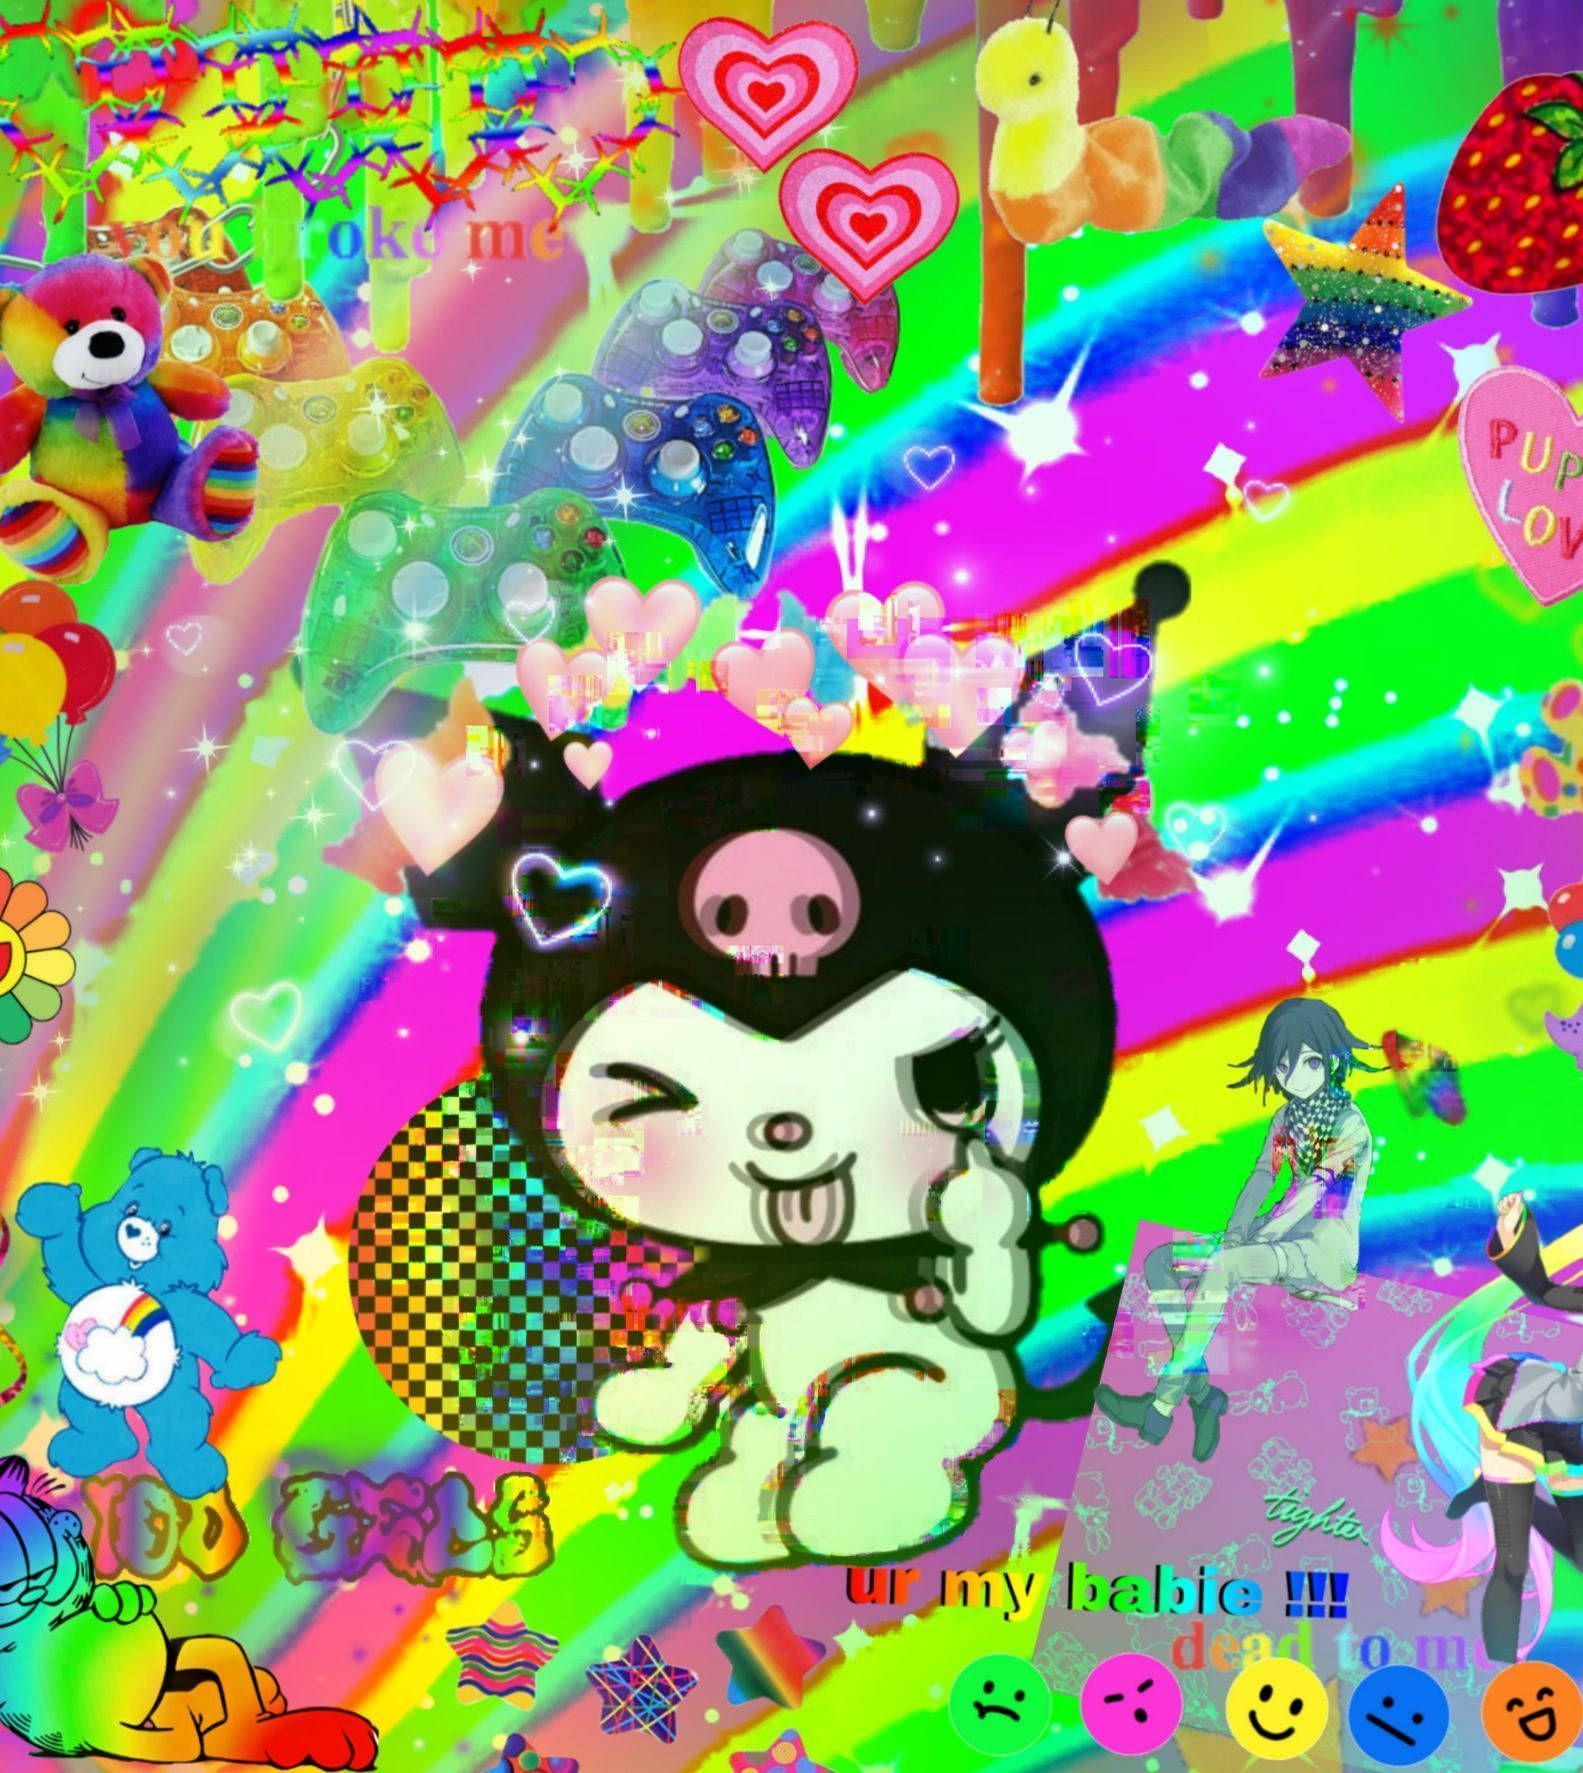 A colorful image with a pig with horns and a rainbow - Glitchcore